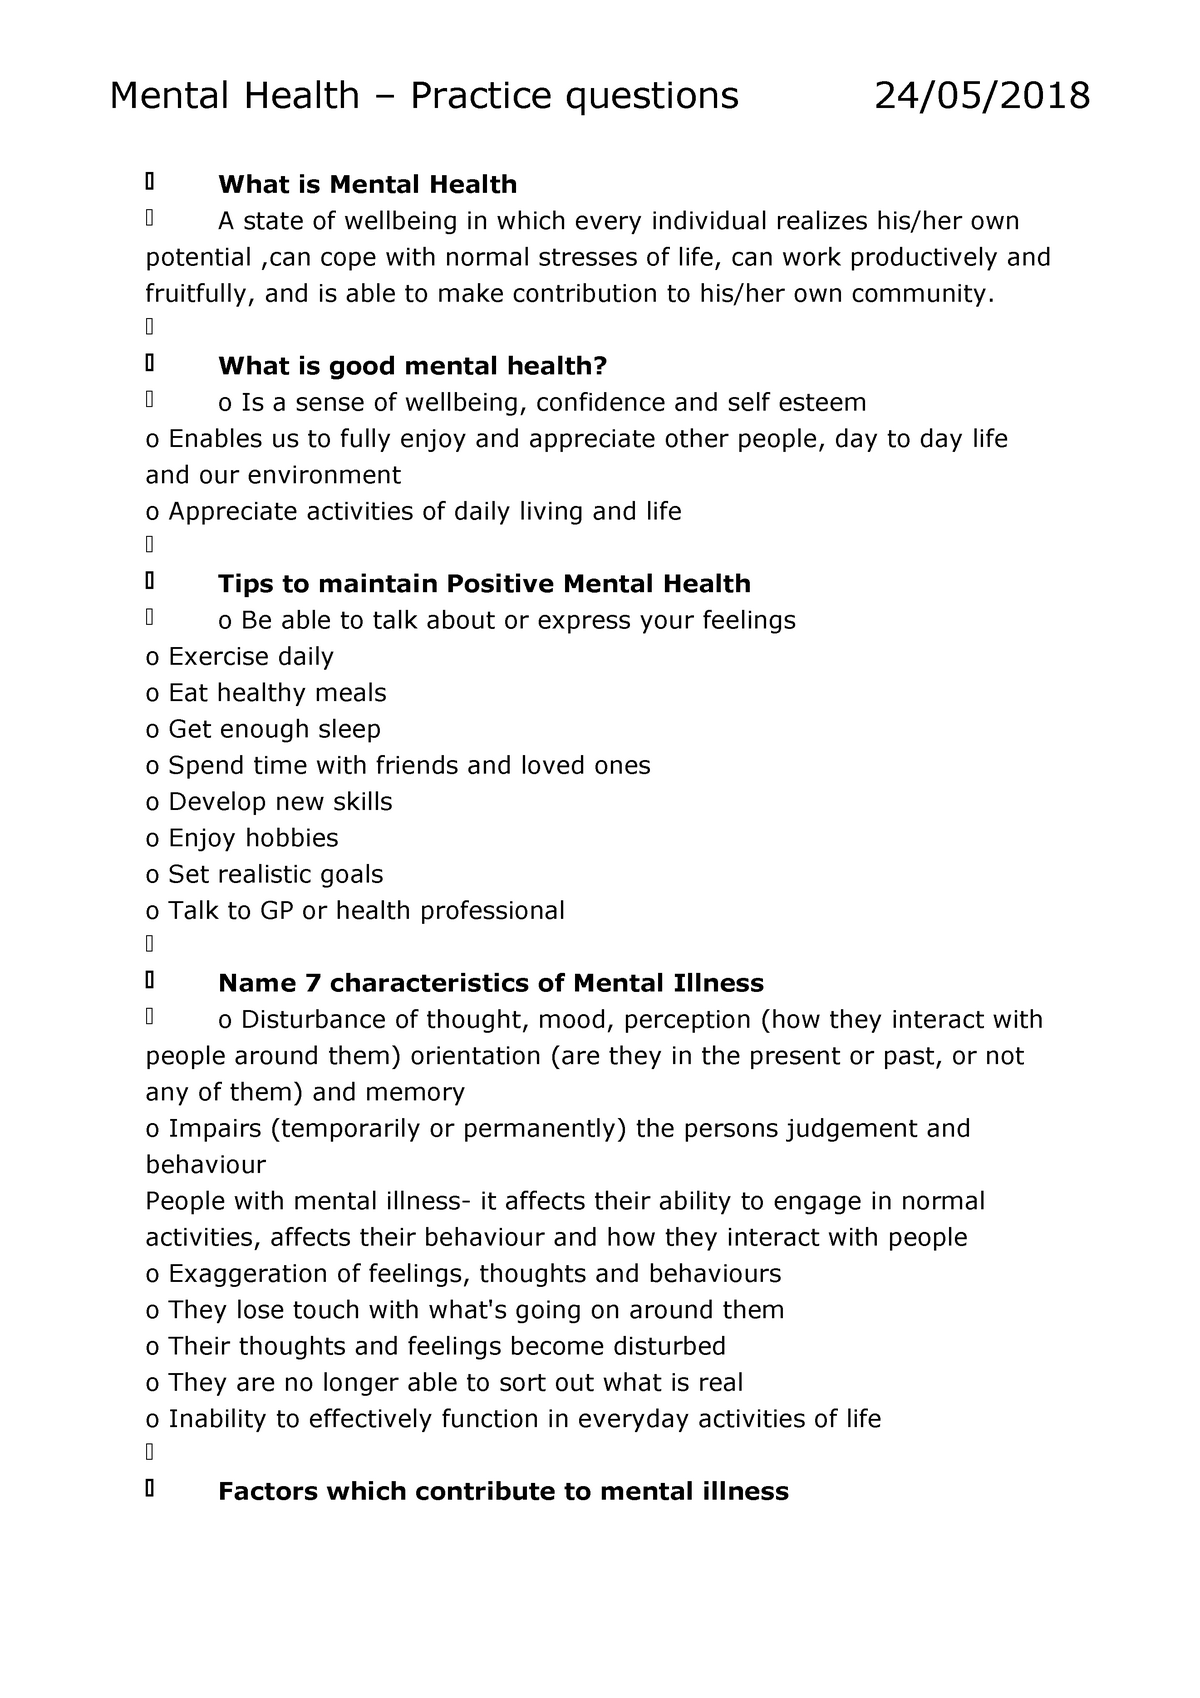 research questions for mental health